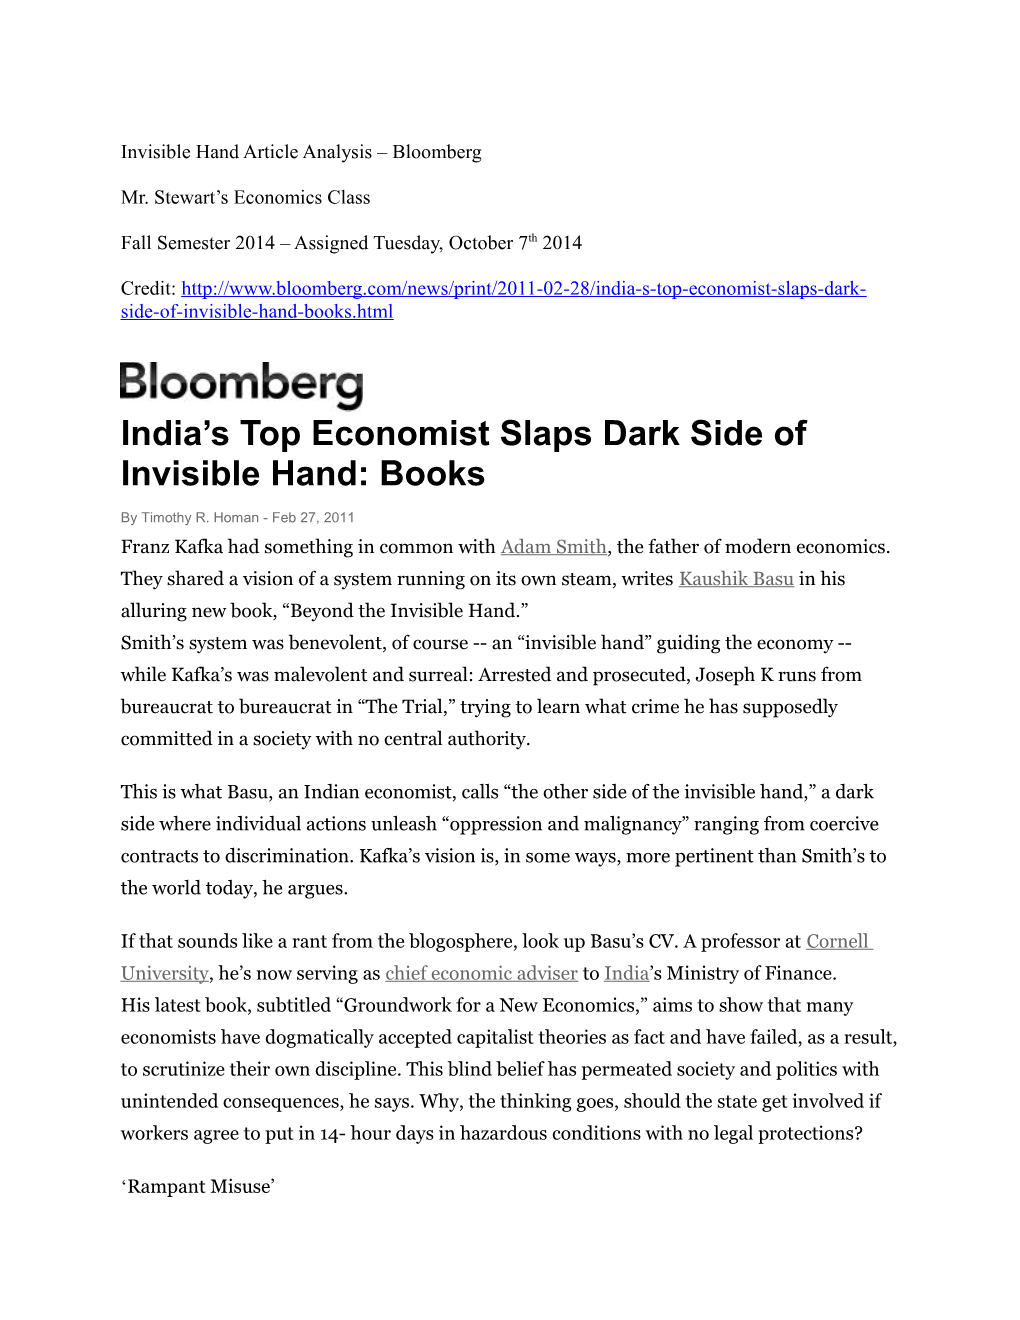 Invisible Hand Article Analysis Bloomberg